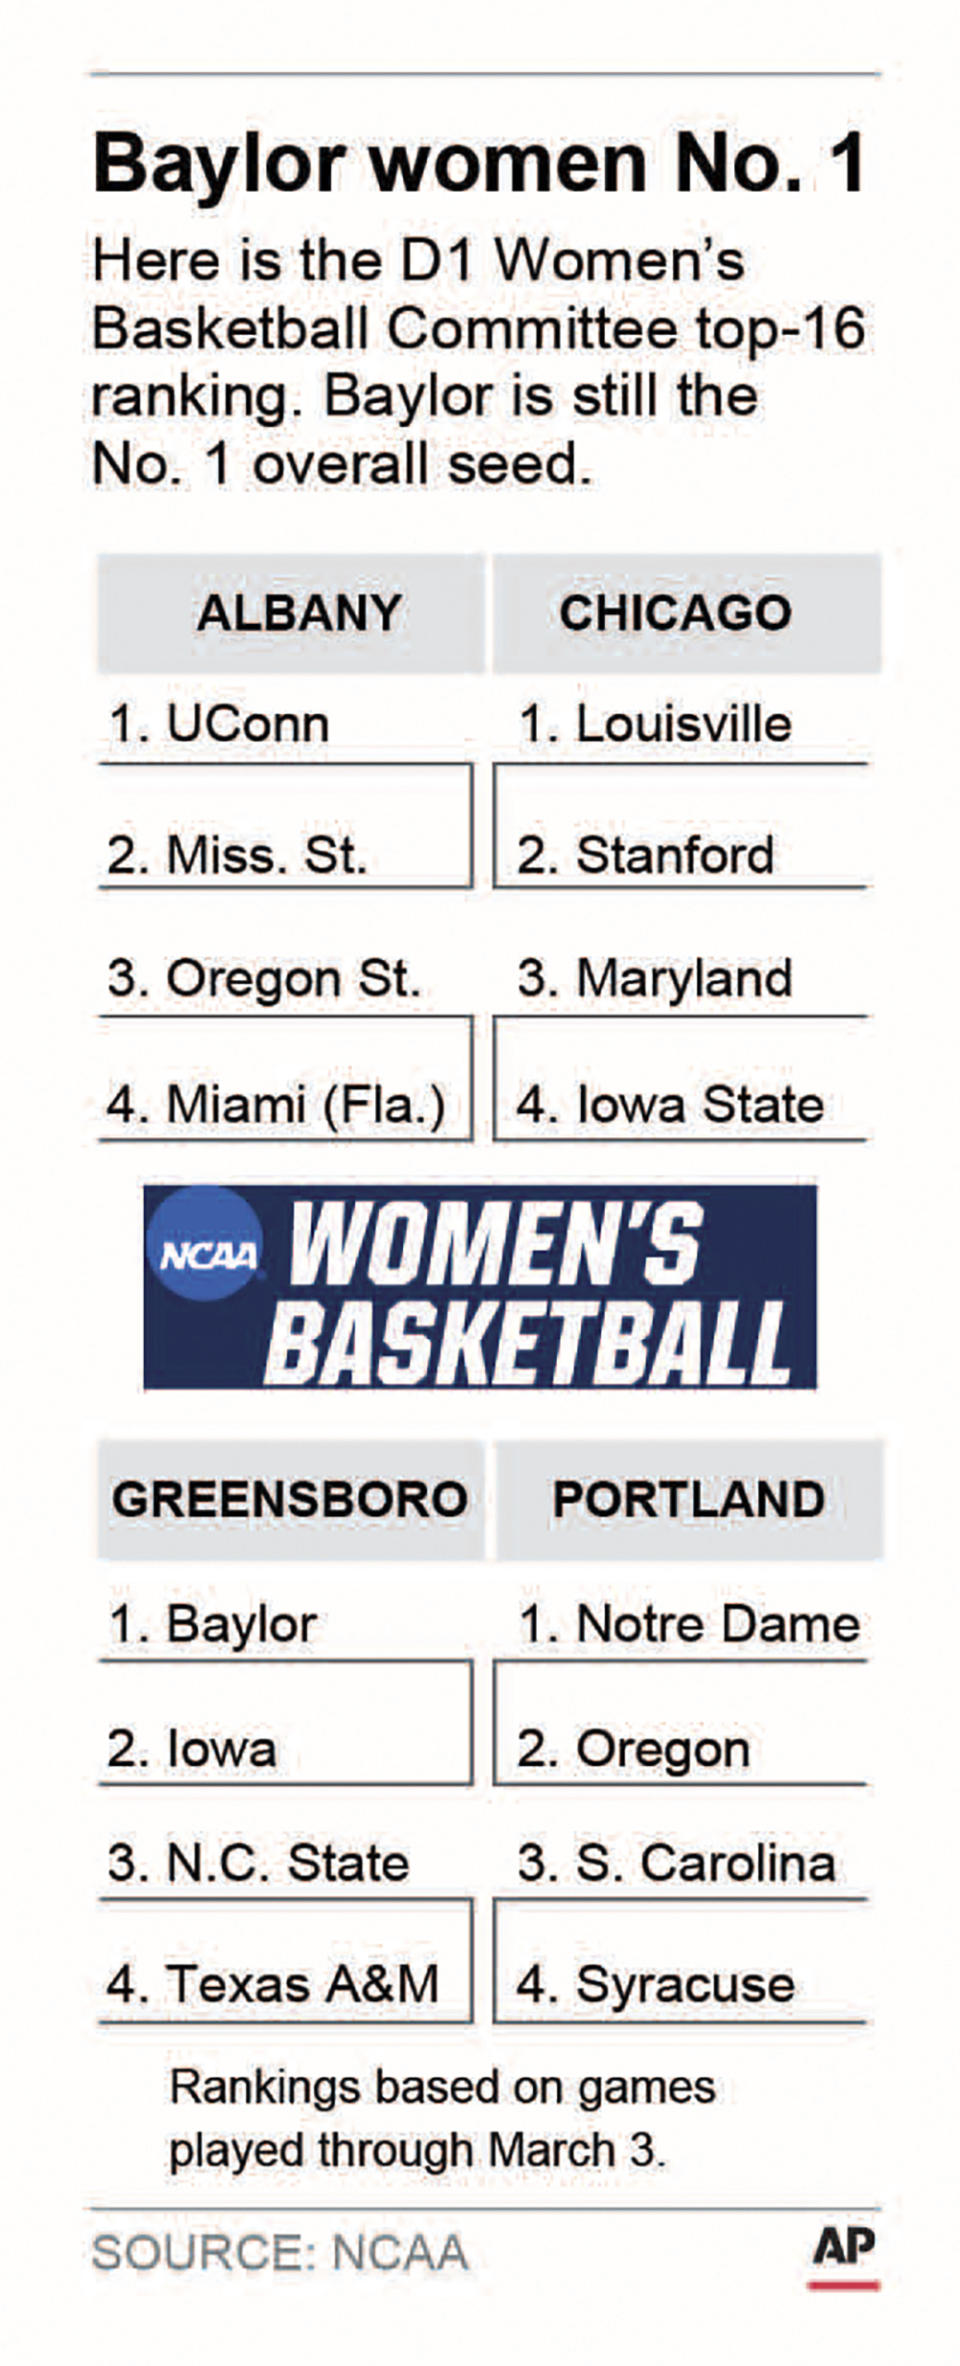 Graphic shows the DI Women's Basketball Committee top-16 ranking reveal with region assignments; 1c x 4 1/2 inches;;